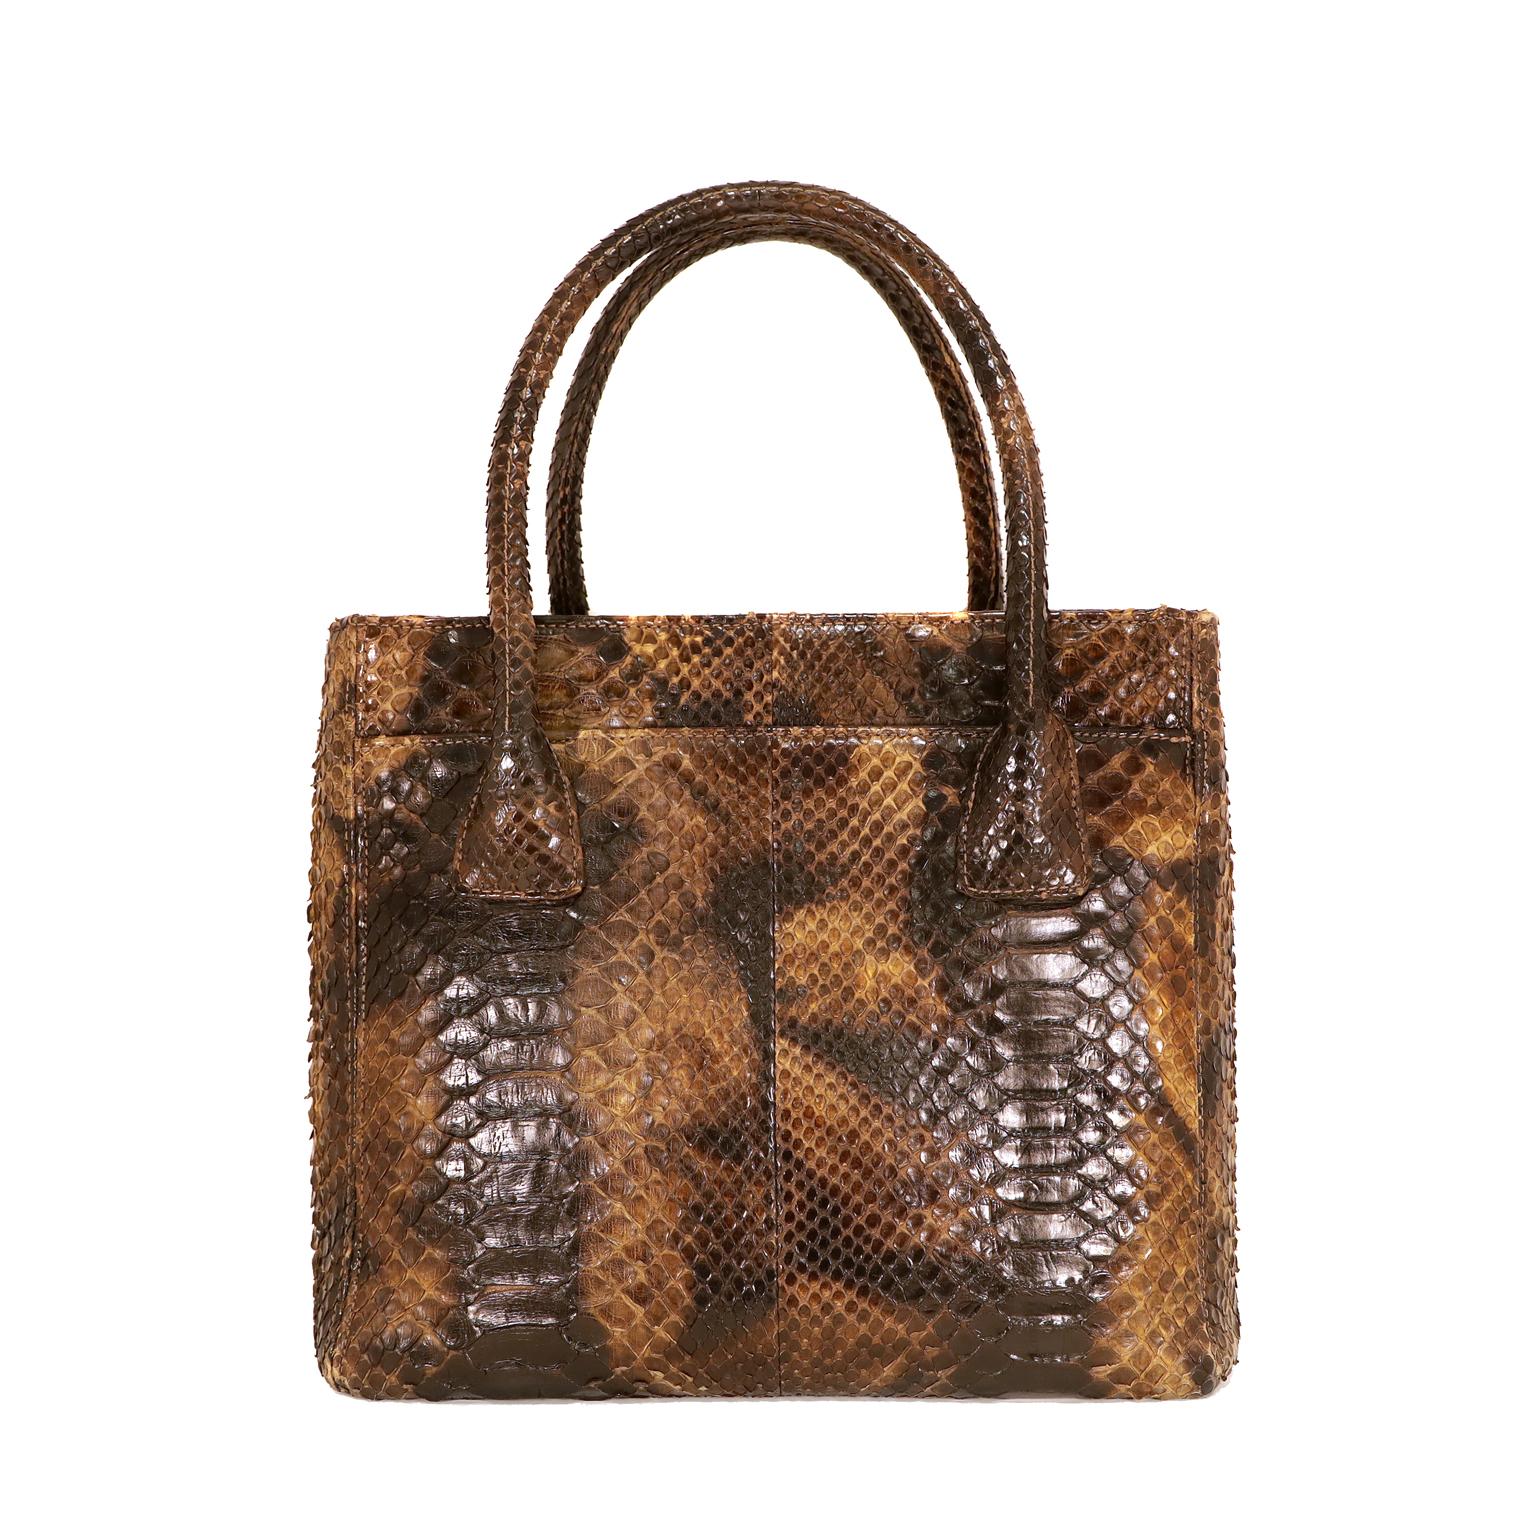 This authentic Chanel Brown Python Tote is in beautiful condition.  It has enjoyed a previous life and may have light imperfections.  
Multihued brown and tan python tote has ruthenium CC twist lock on a front pocket.  Conveniently divided into